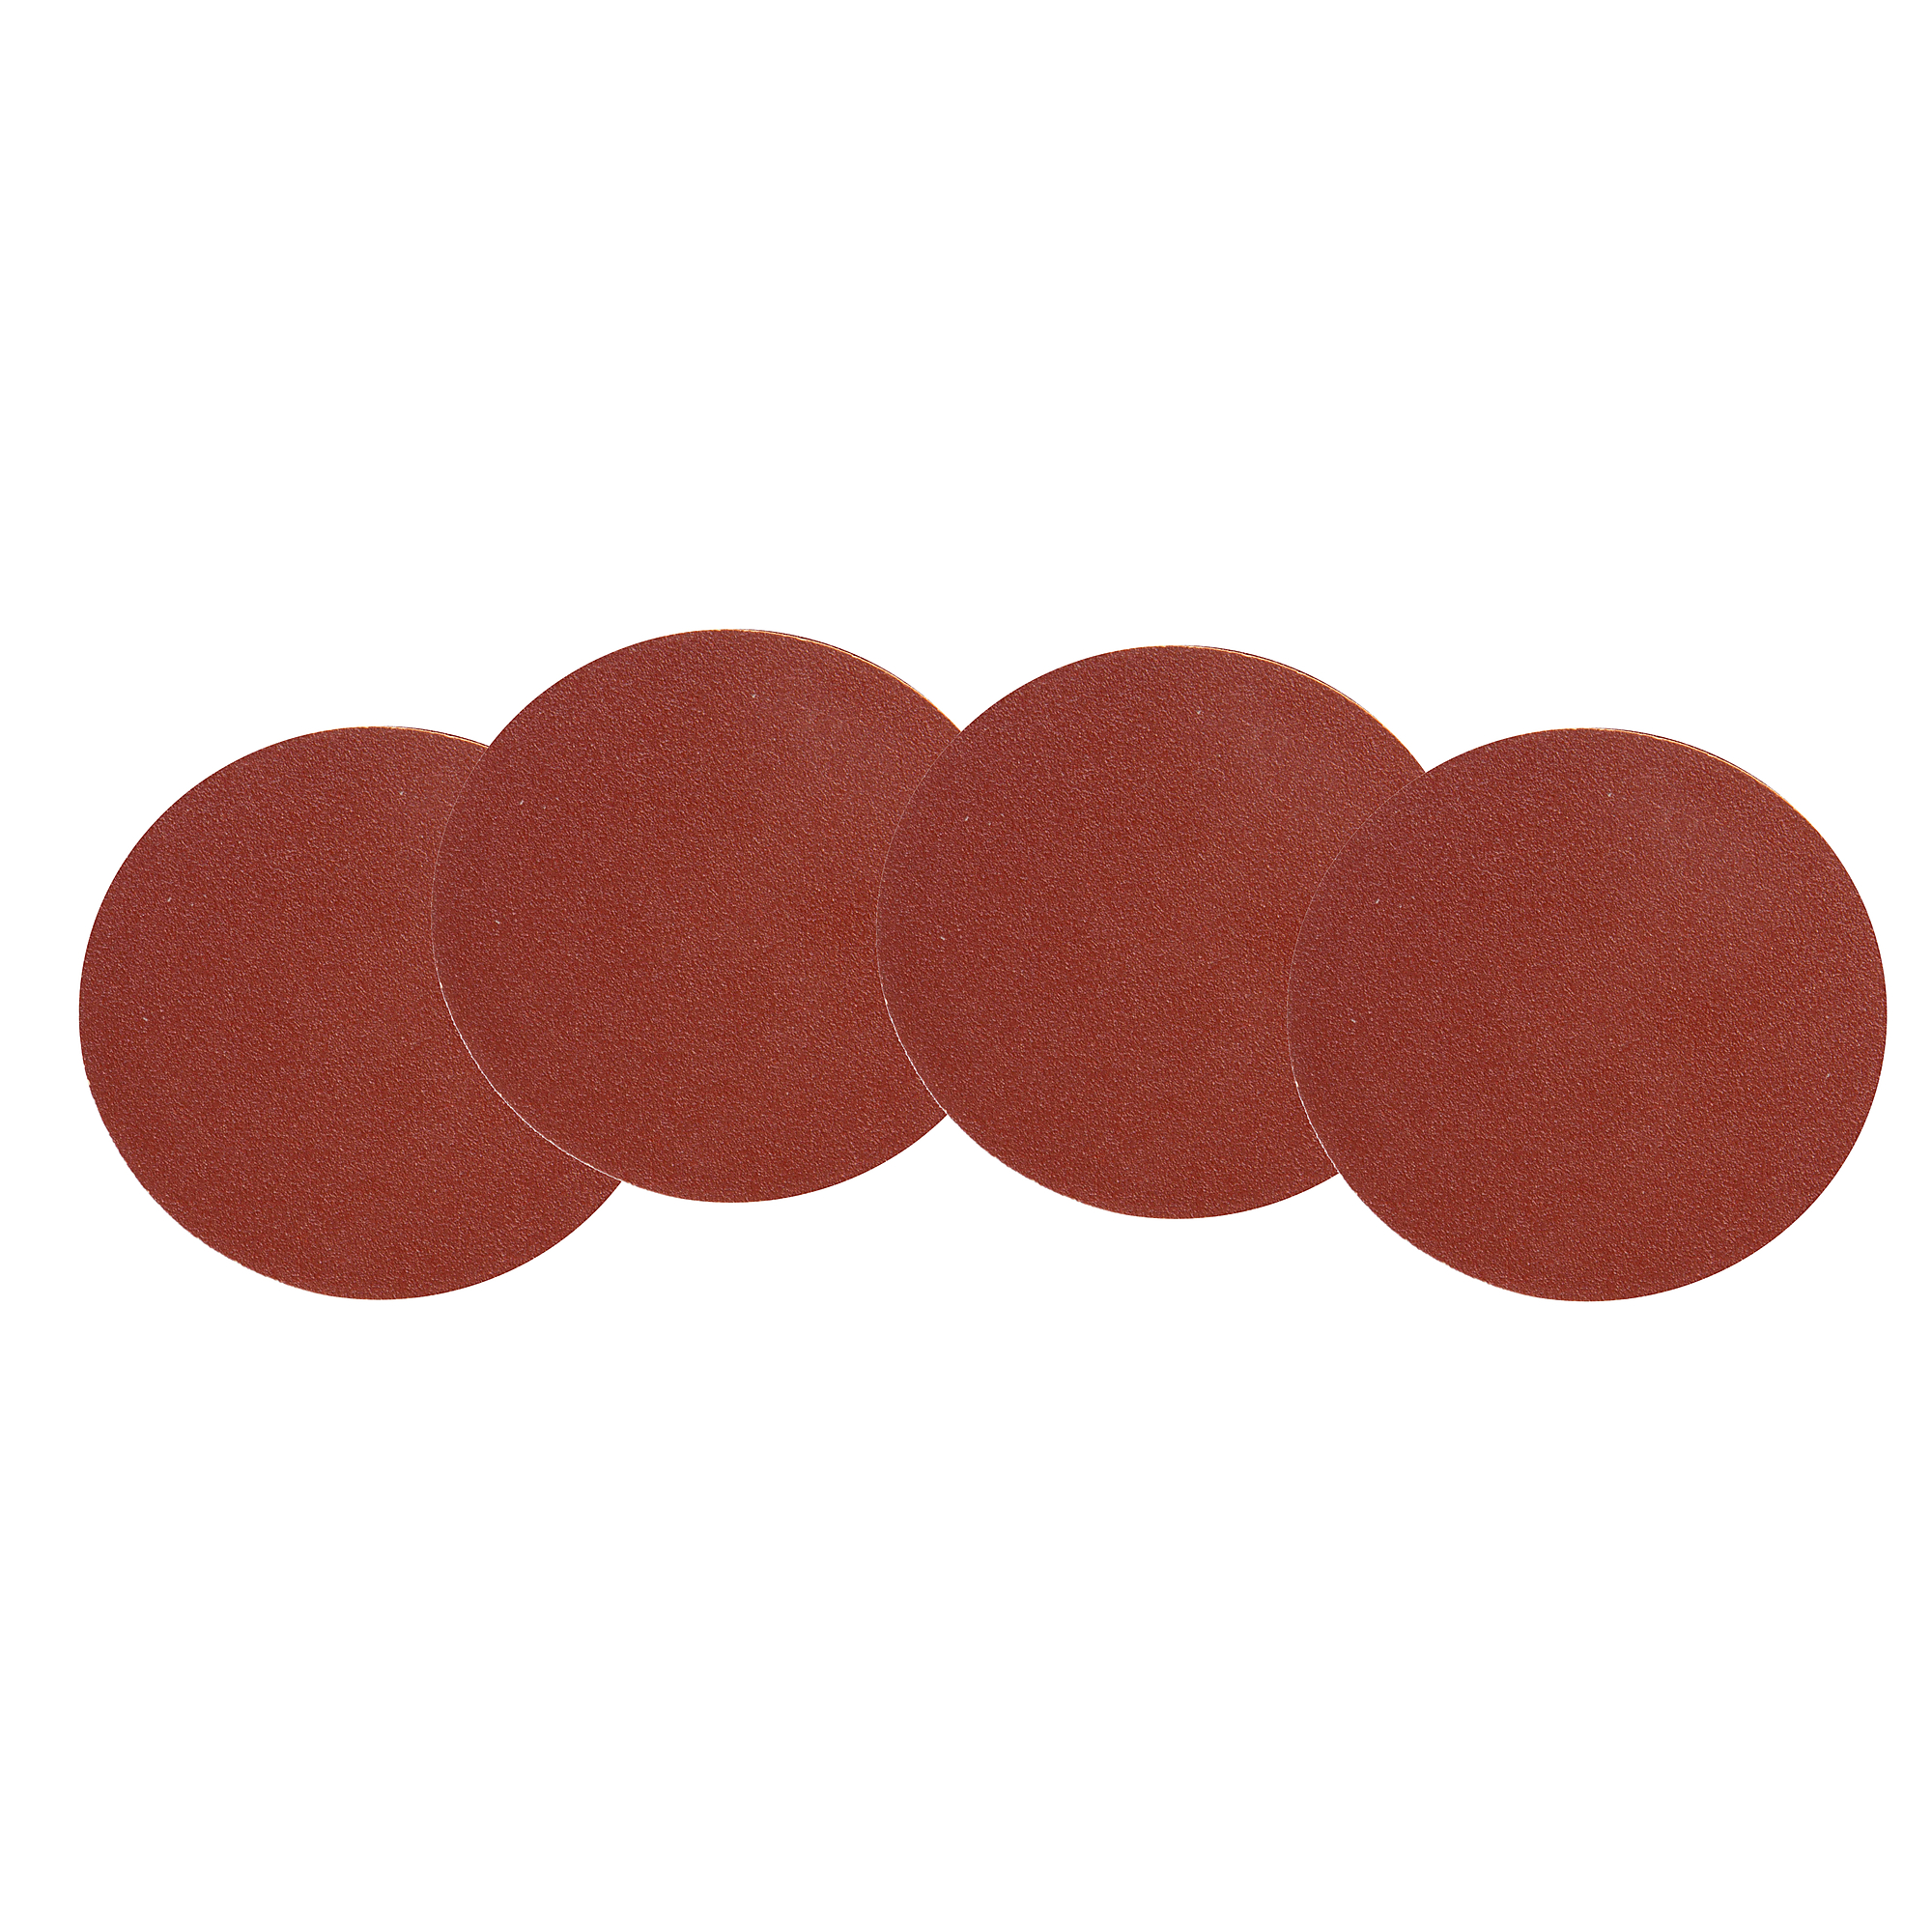 WEN, 4 12Inch 120-Grit Adhesive-Backed Disc Sandpaper, Pieces (qty.) 4 Grit 120 Model 12SD120